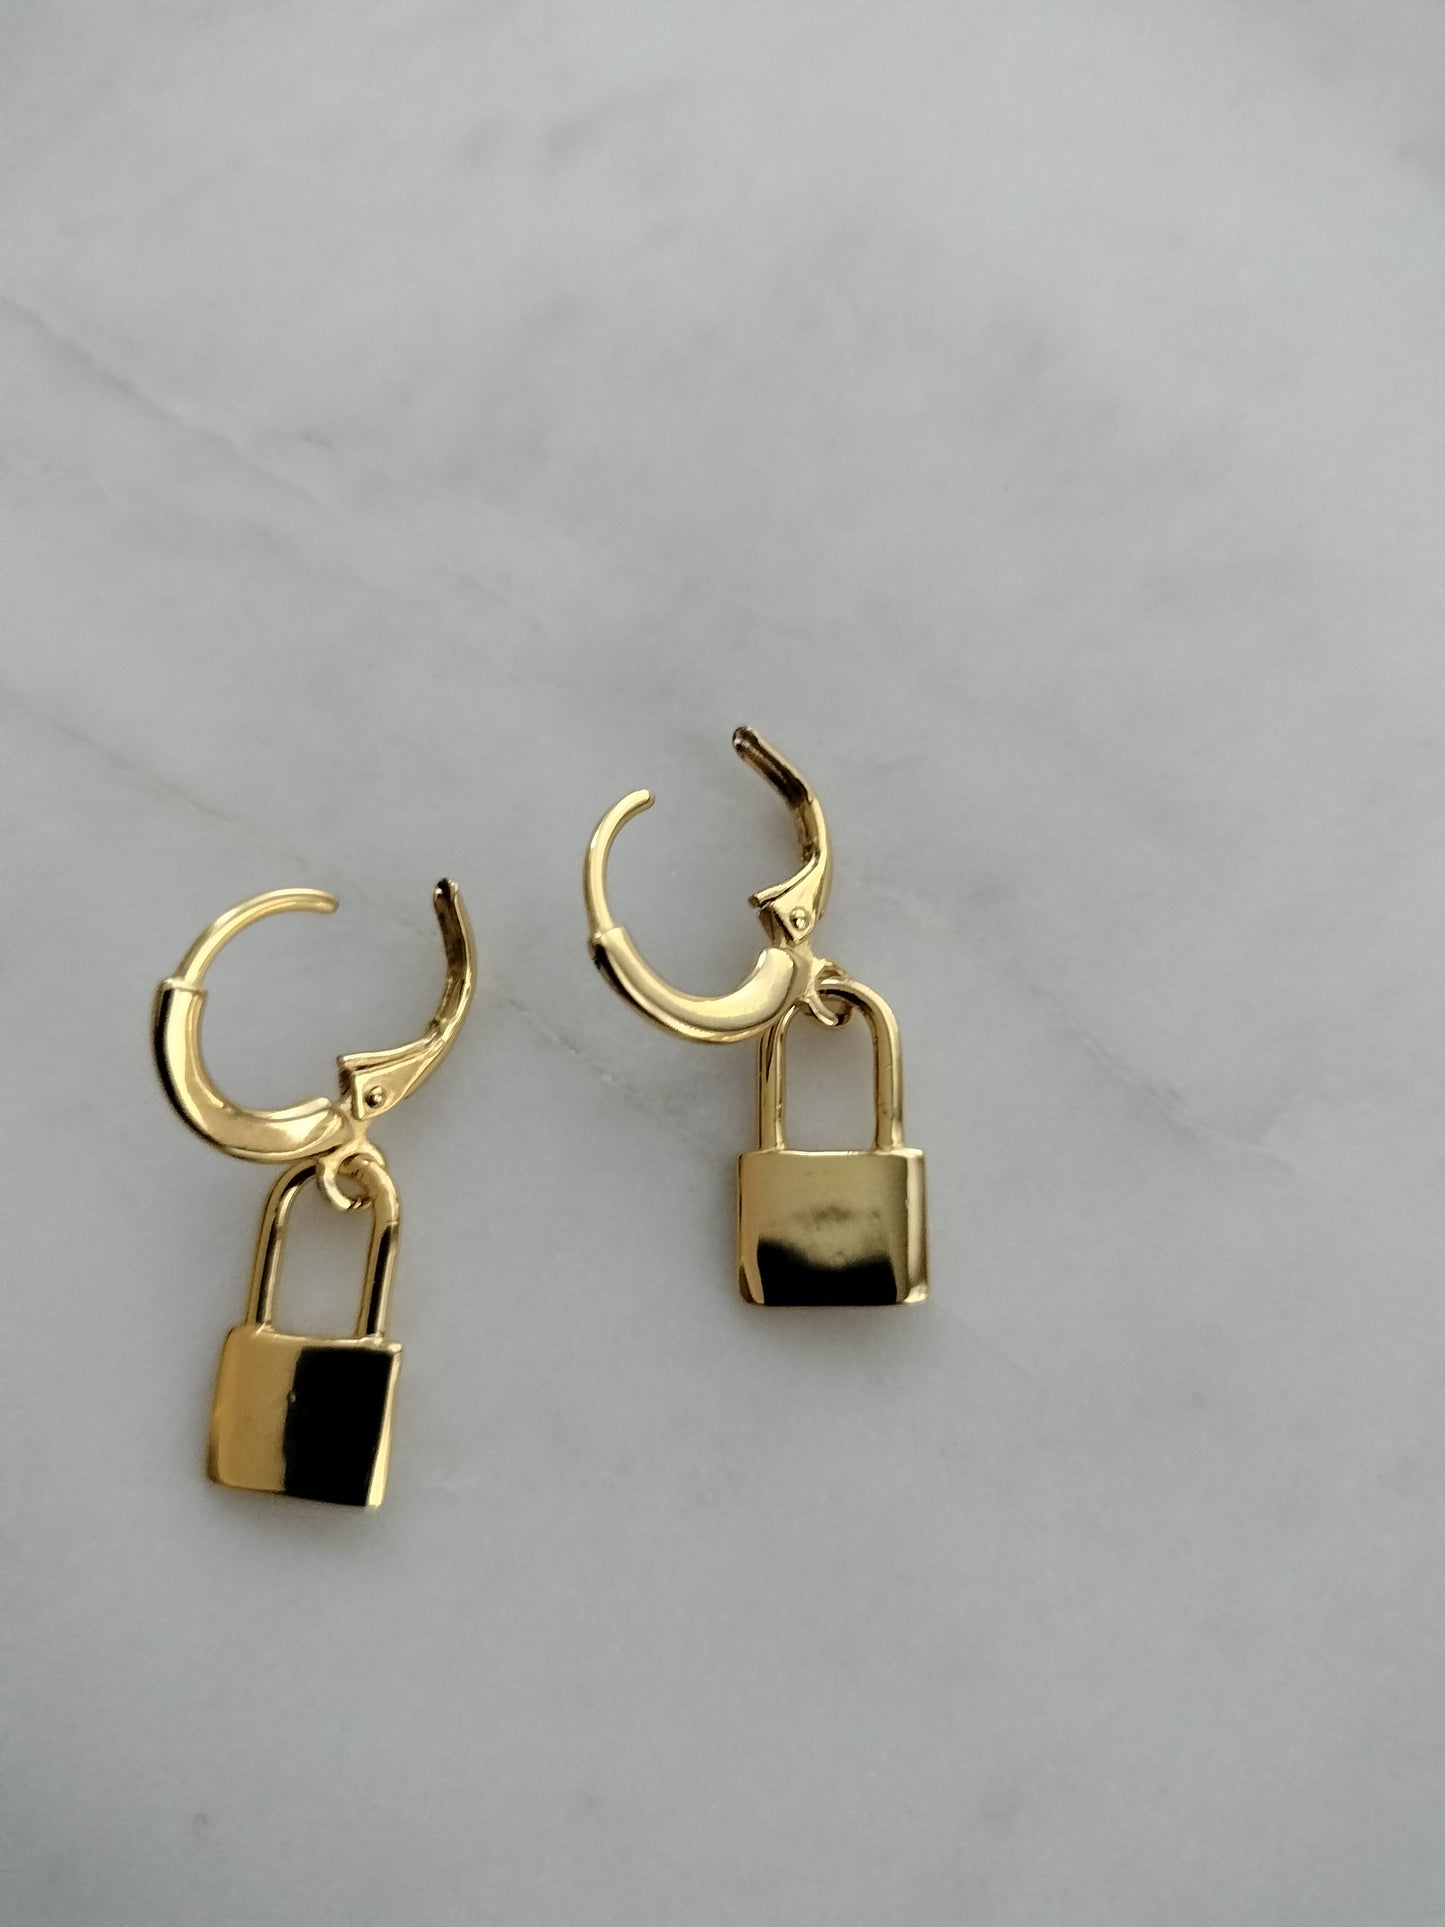 925 Sterling silver lock drop earrings plated with 18k gold🥇